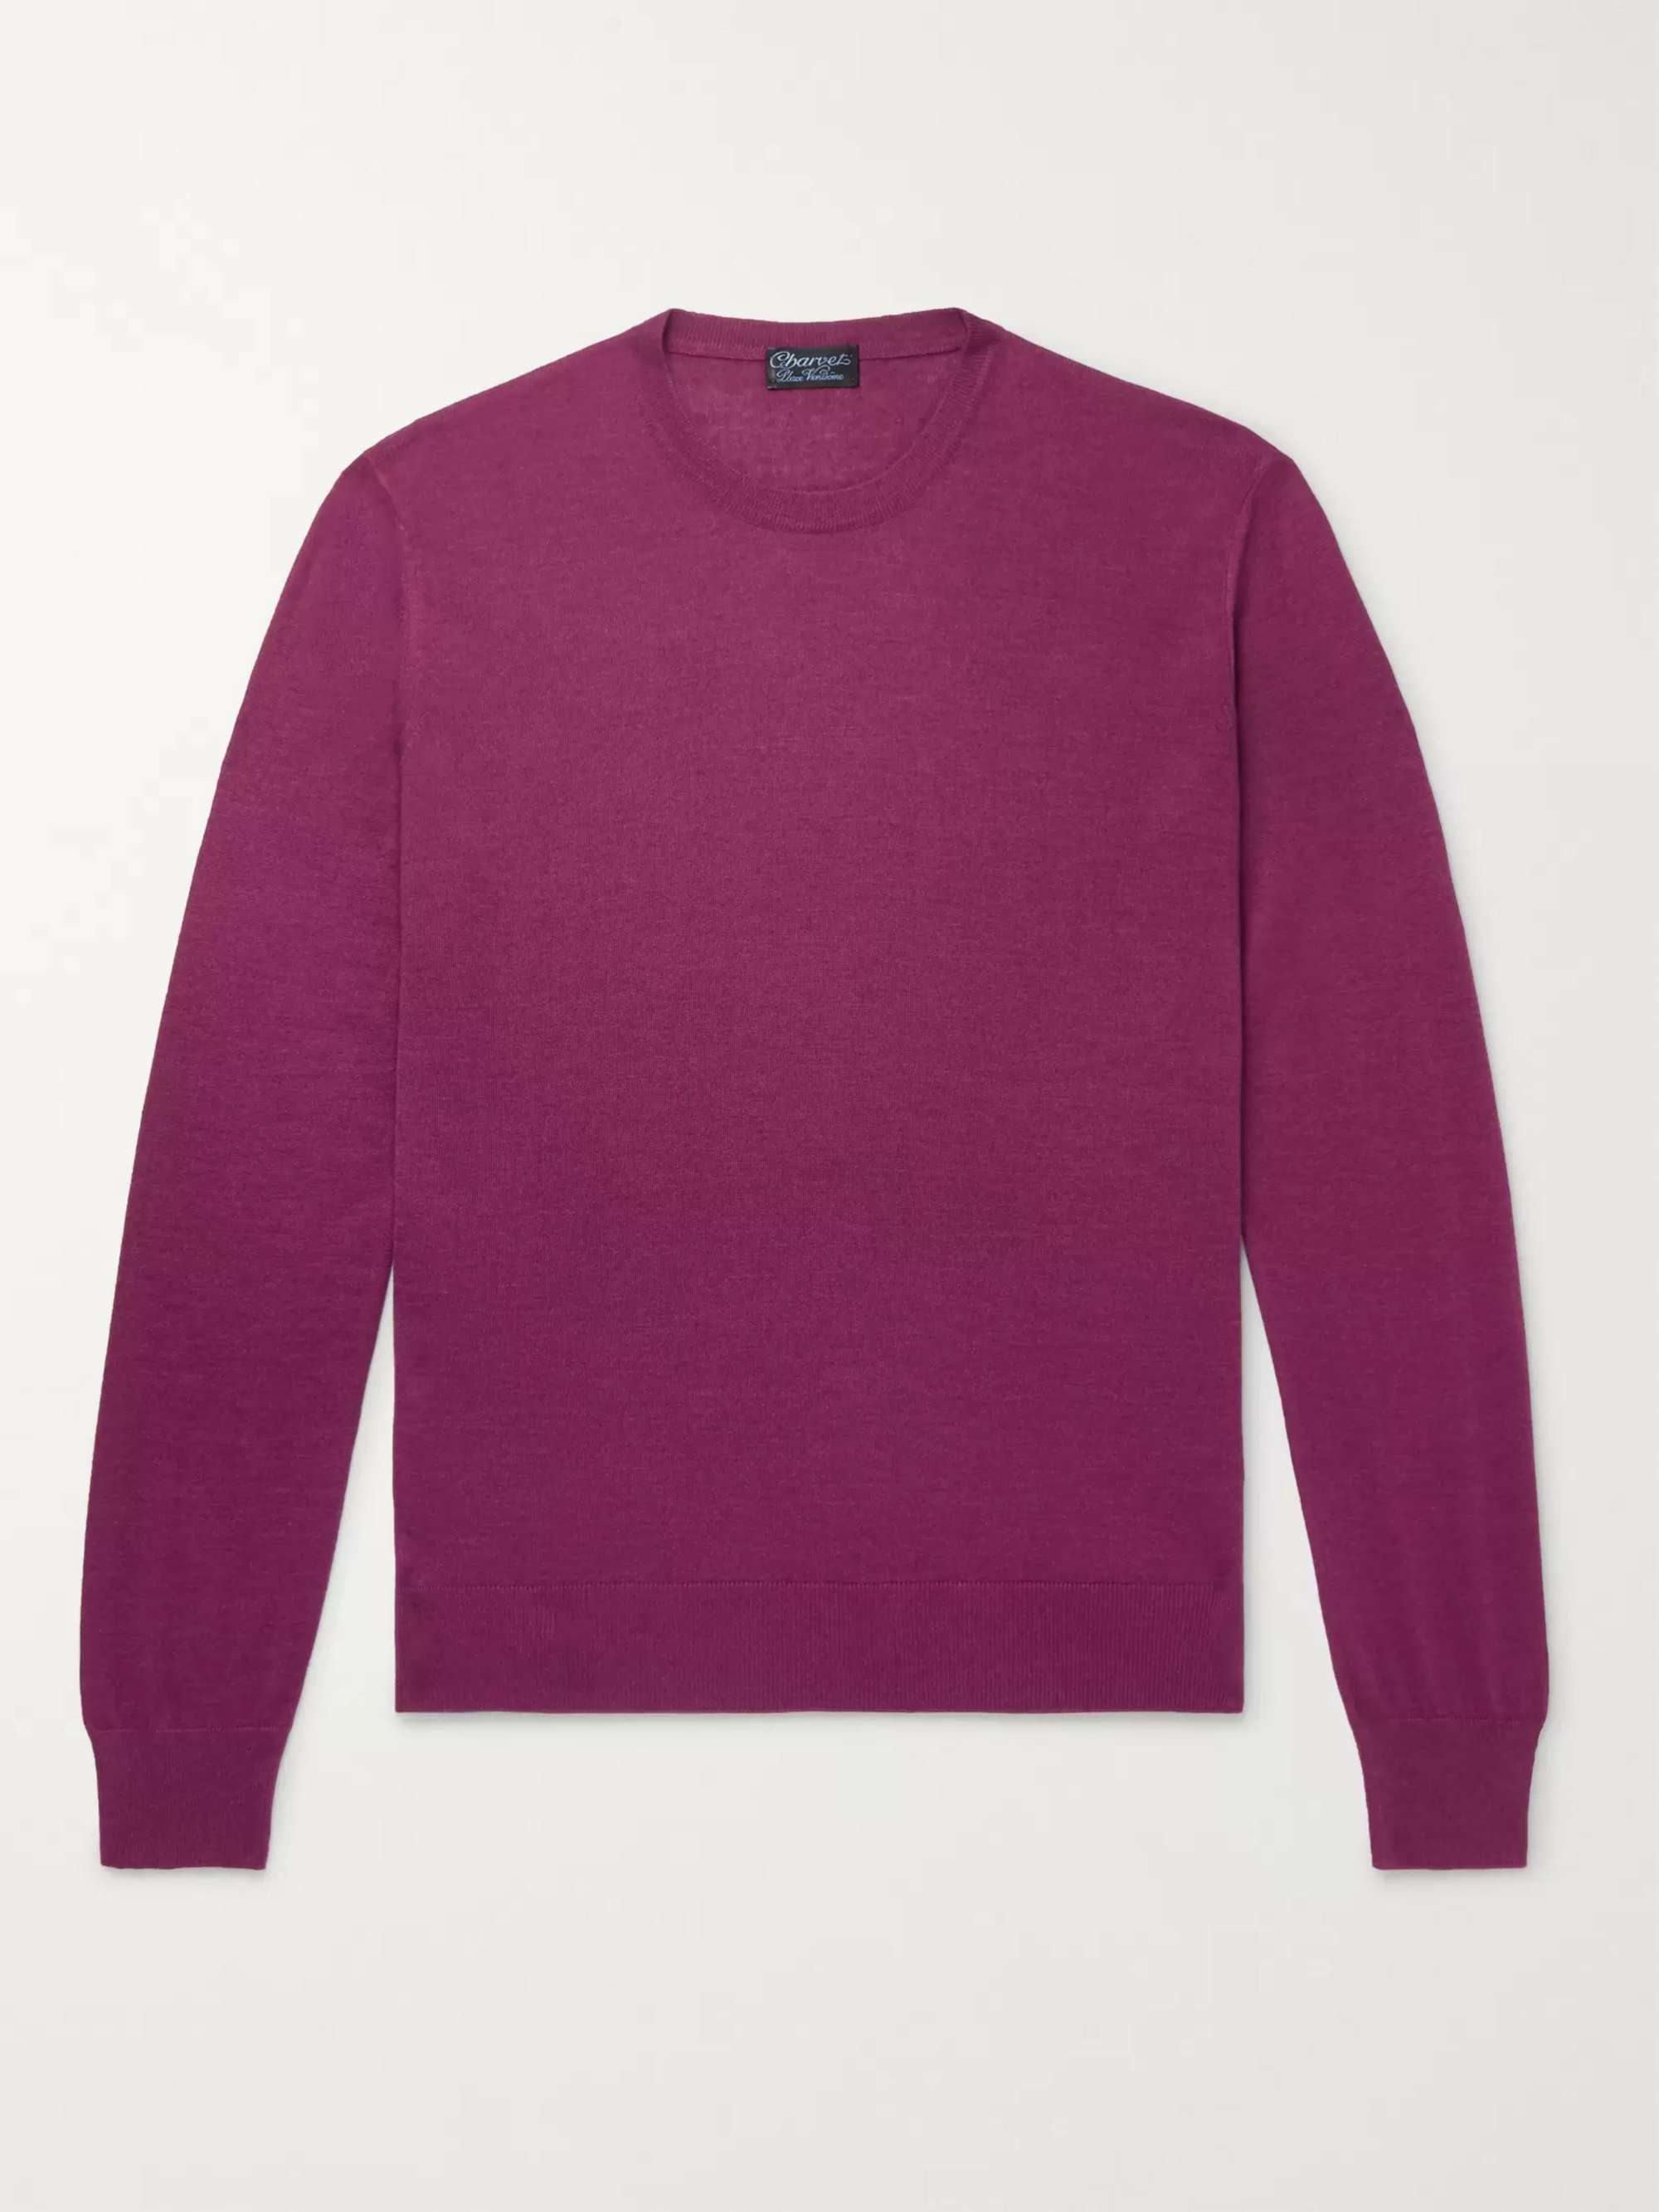 CHARVET Slim-Fit Cashmere and Silk-Blend Sweater